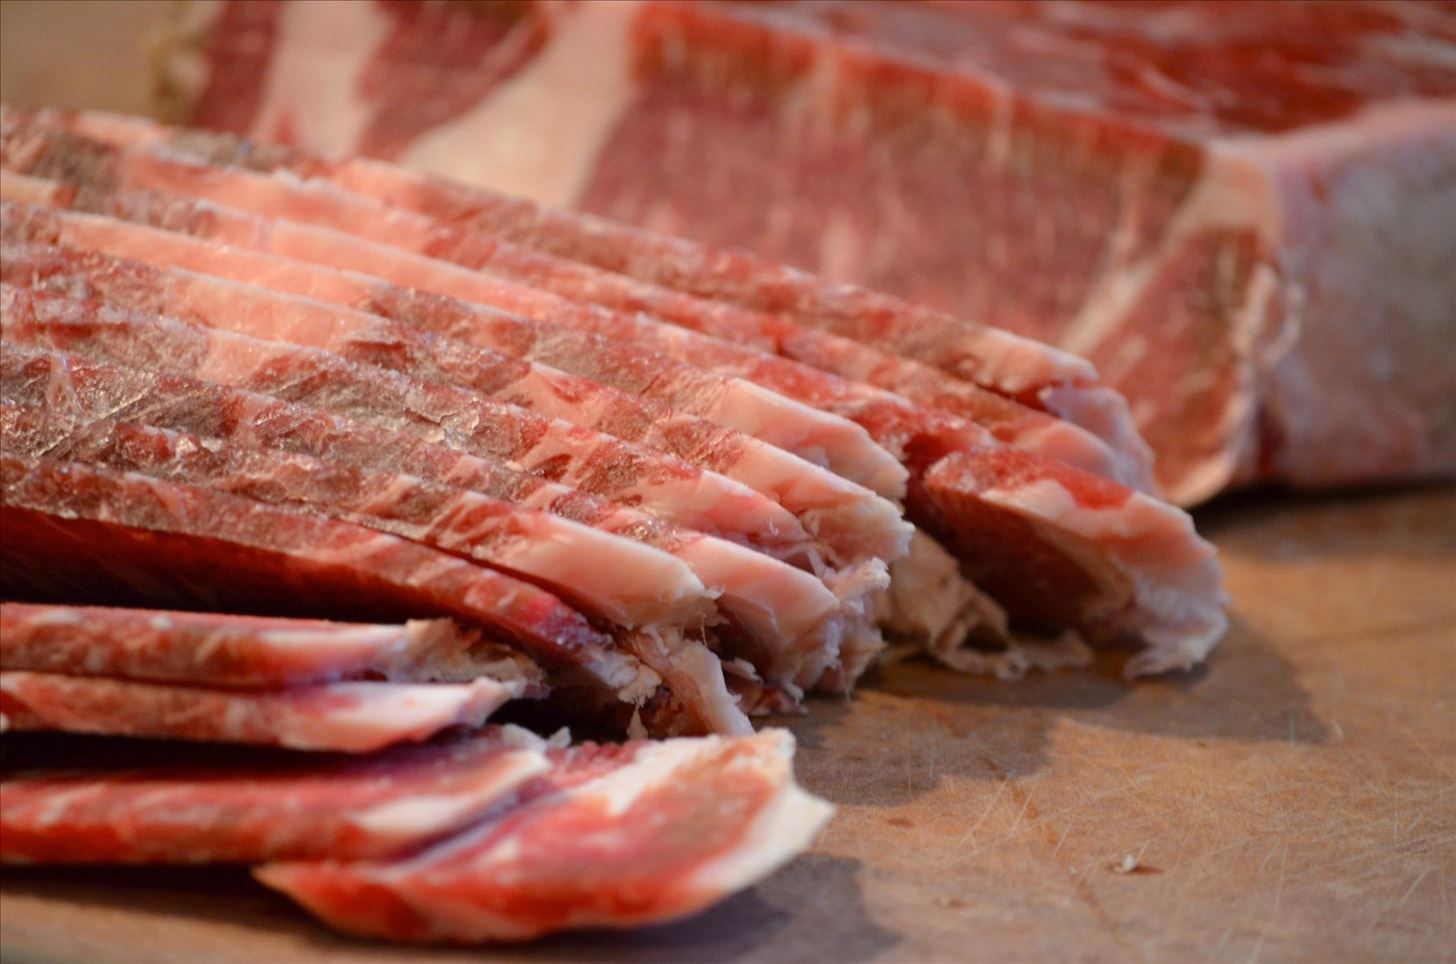 The Essential Secrets for Perfectly Slicing Meat